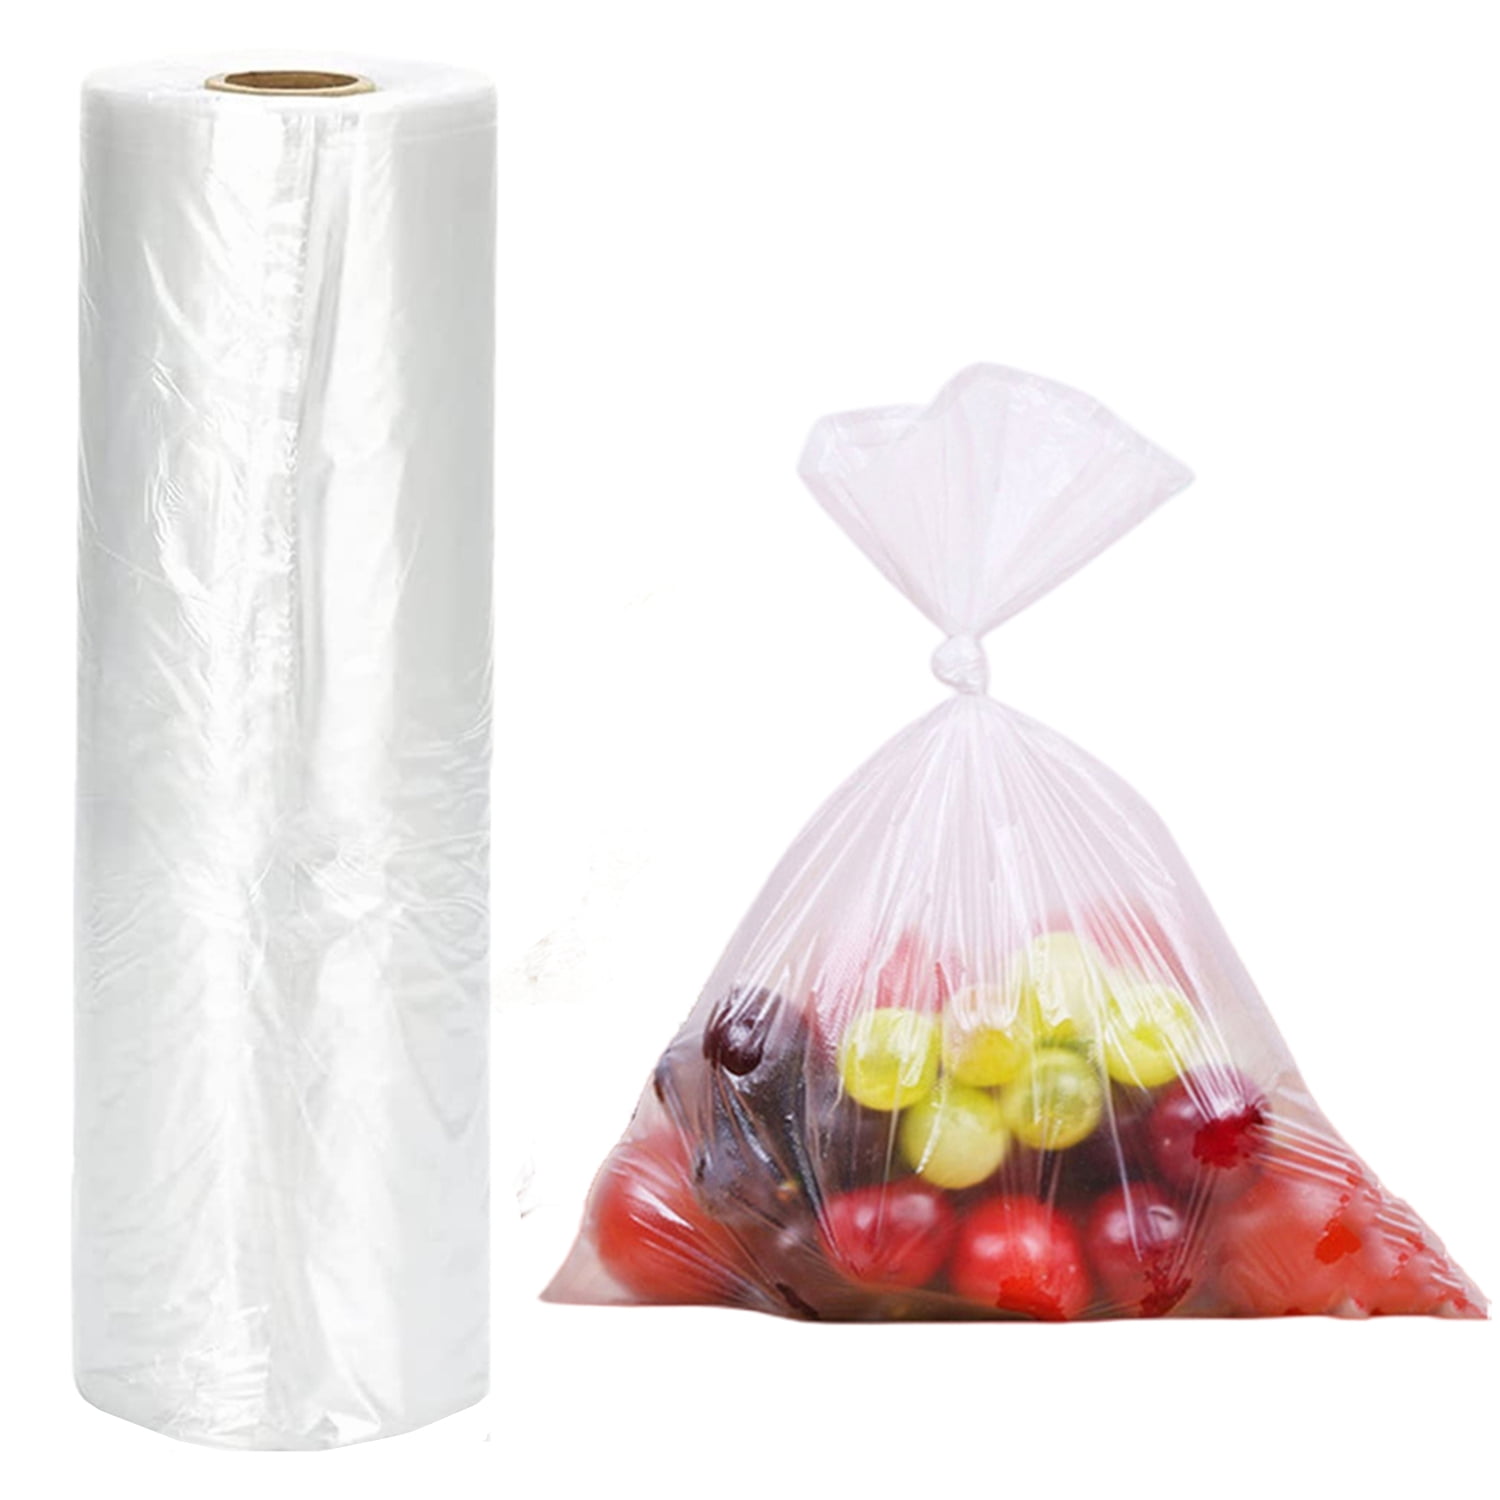 Aluf Plastics 0.6 Mil Clear Poly Food Bags - 8 x 4 x 18 - Pack of 1000 - for Fruits, Vegetables, Meat, & Frozen Food